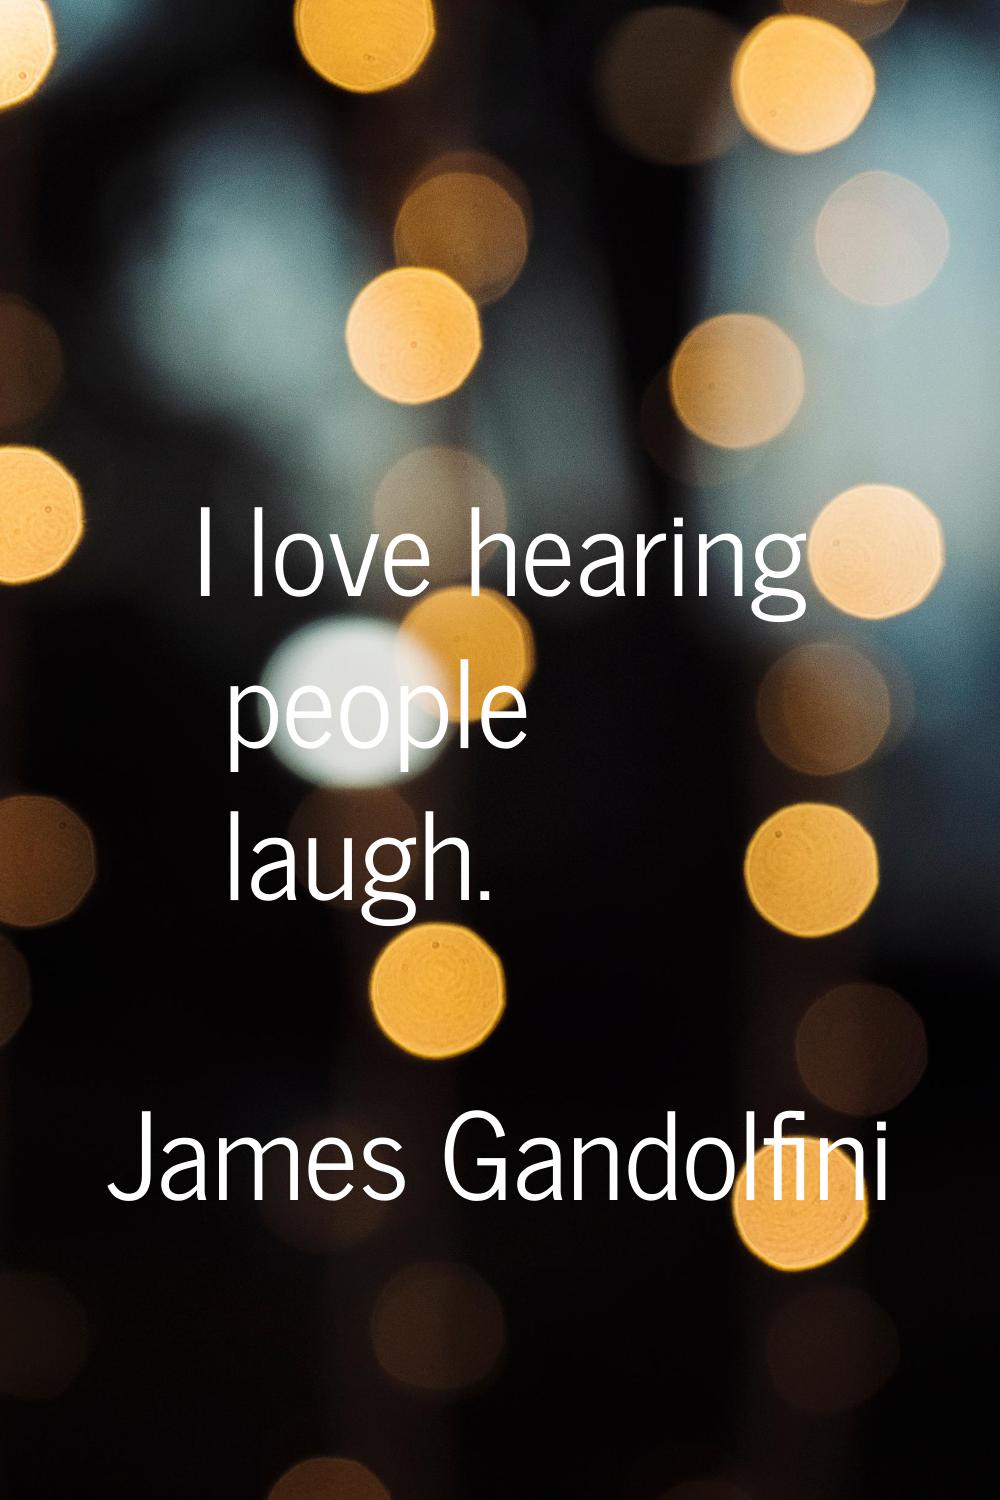 I love hearing people laugh.